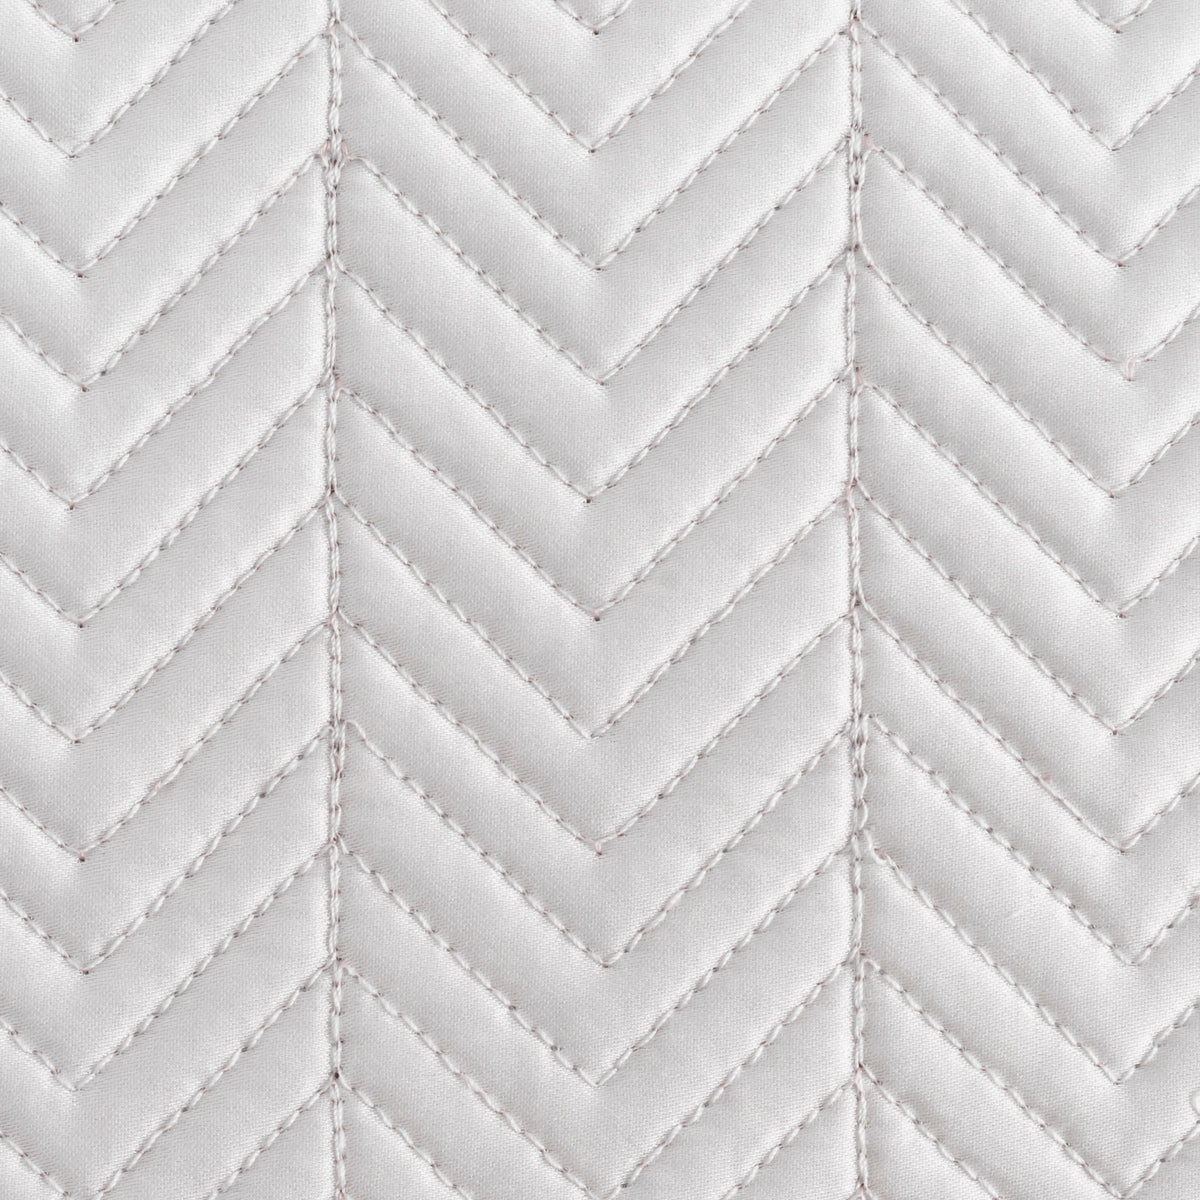 Swatch Sample of Matouk Netto Bedding in Silver Color